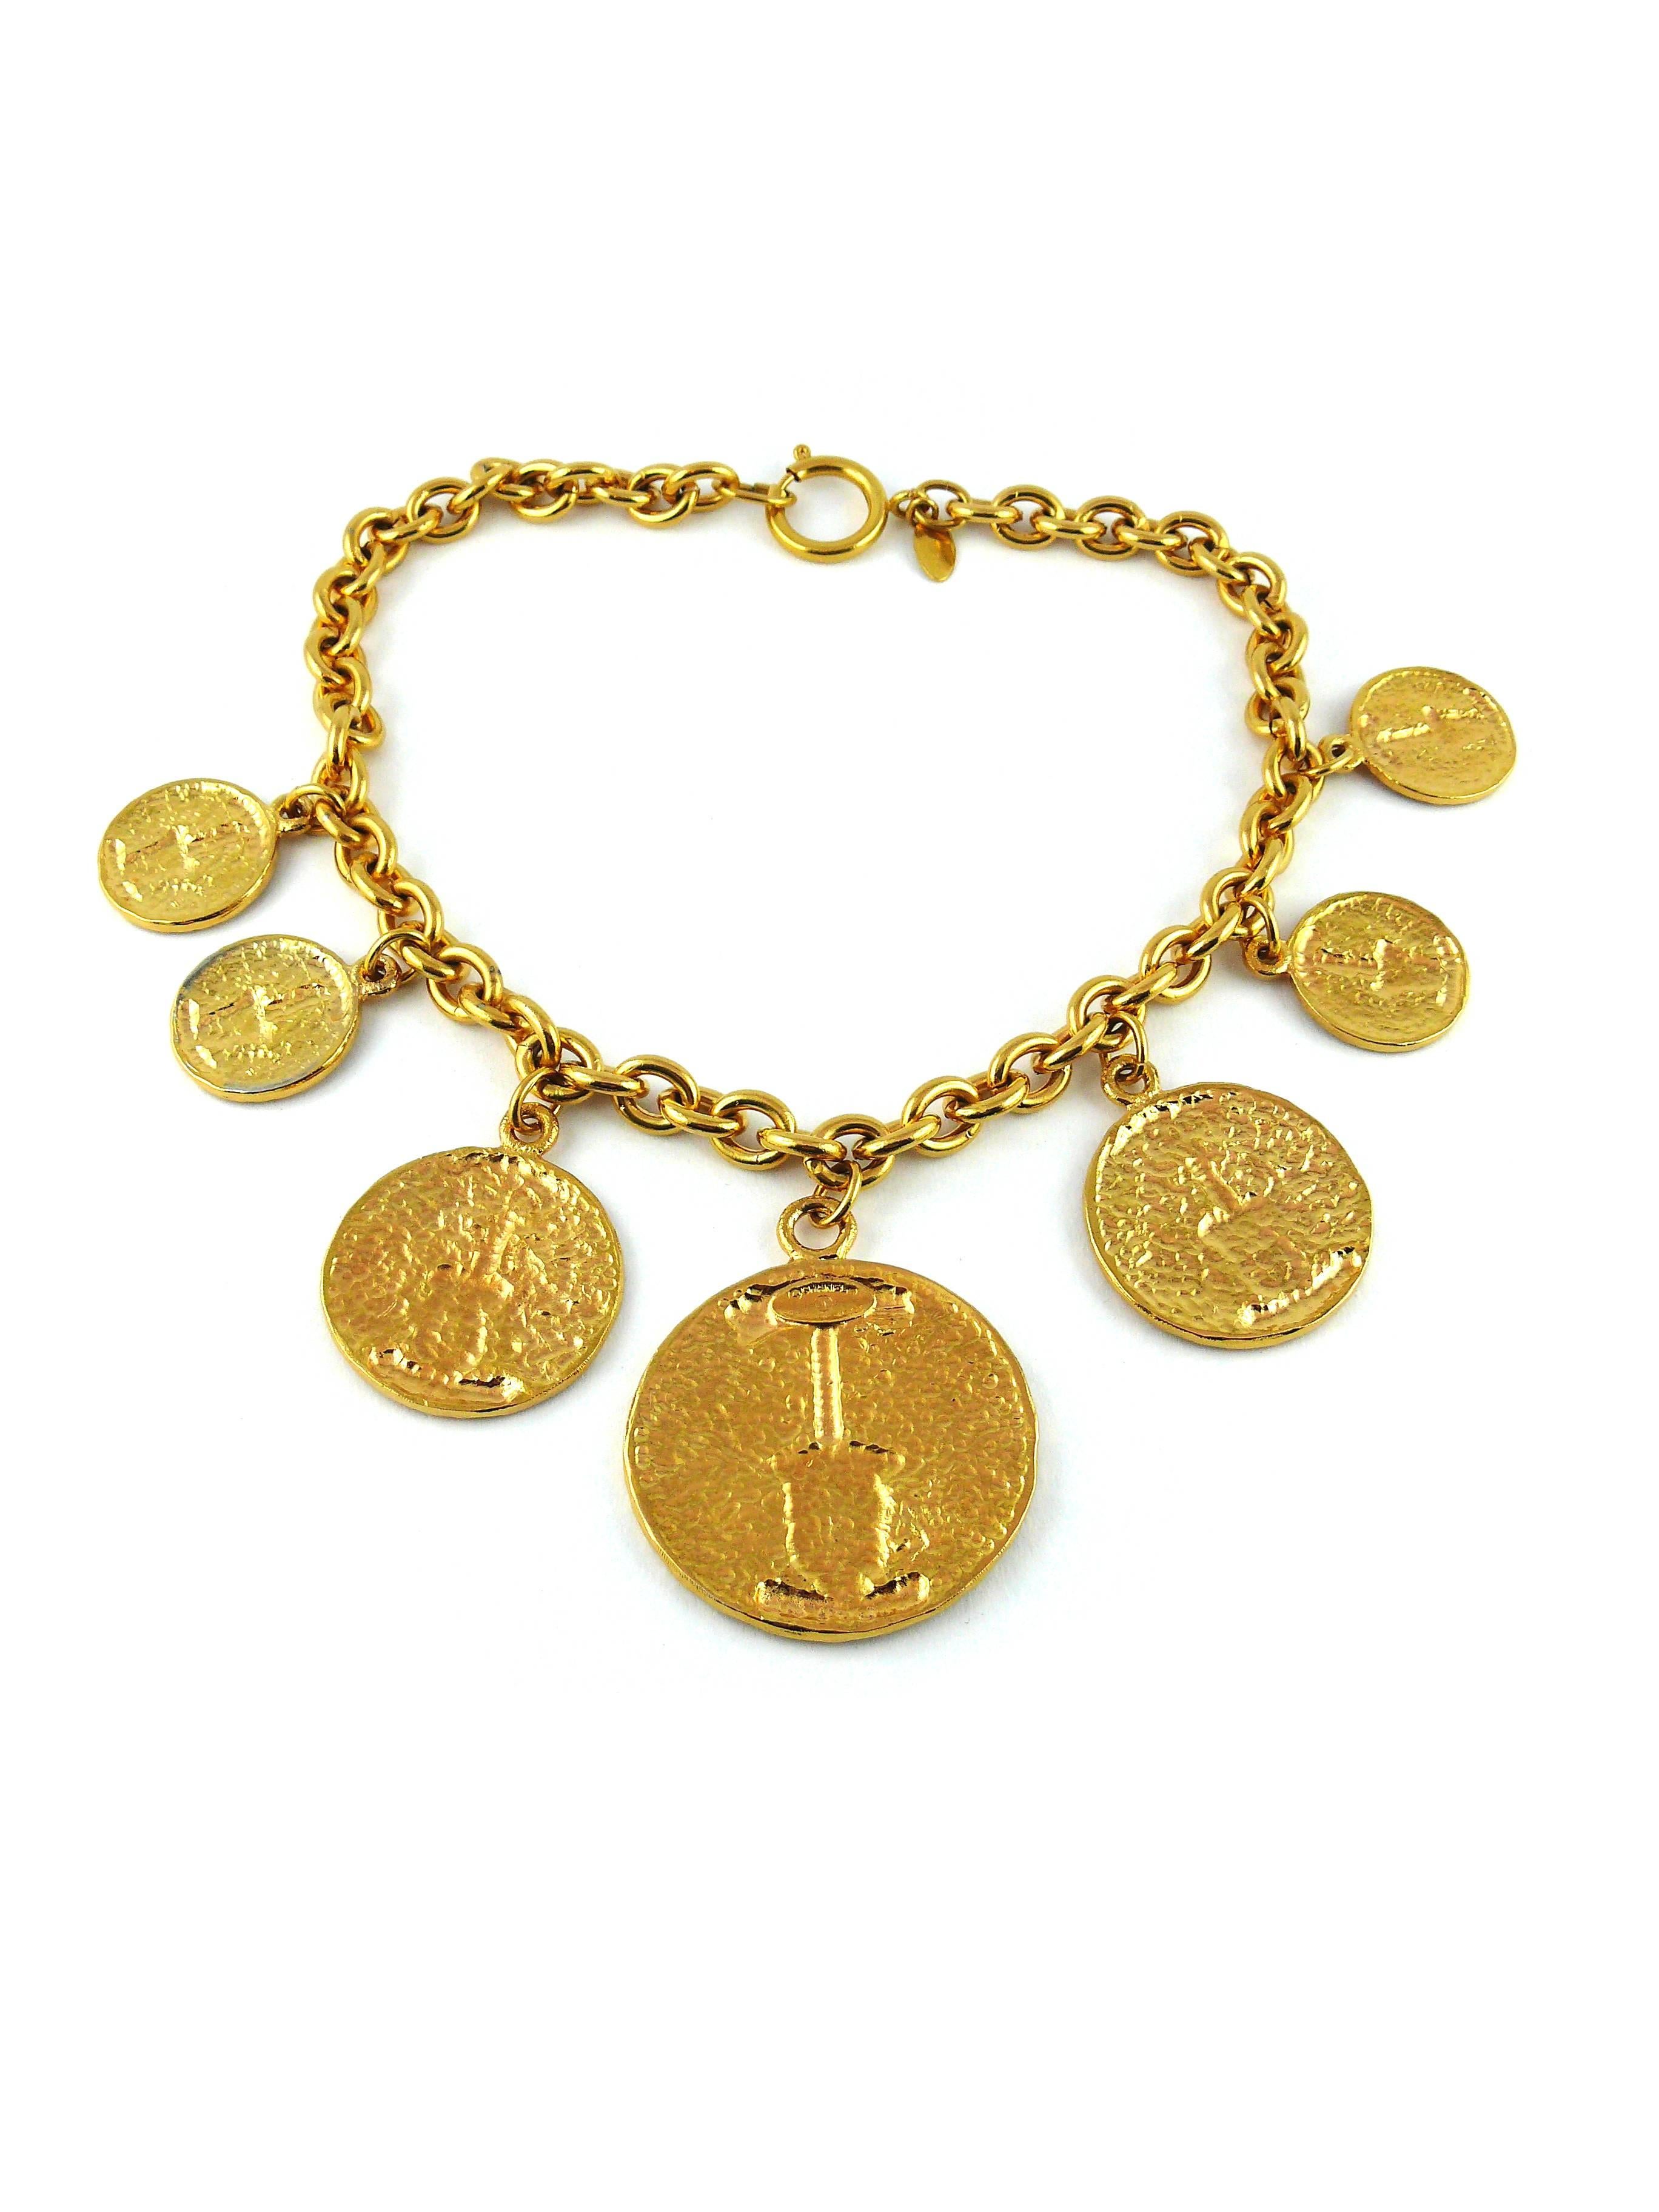 Chanel Vintage Rare Gold Toned Coat of Arms Runway Necklace 2